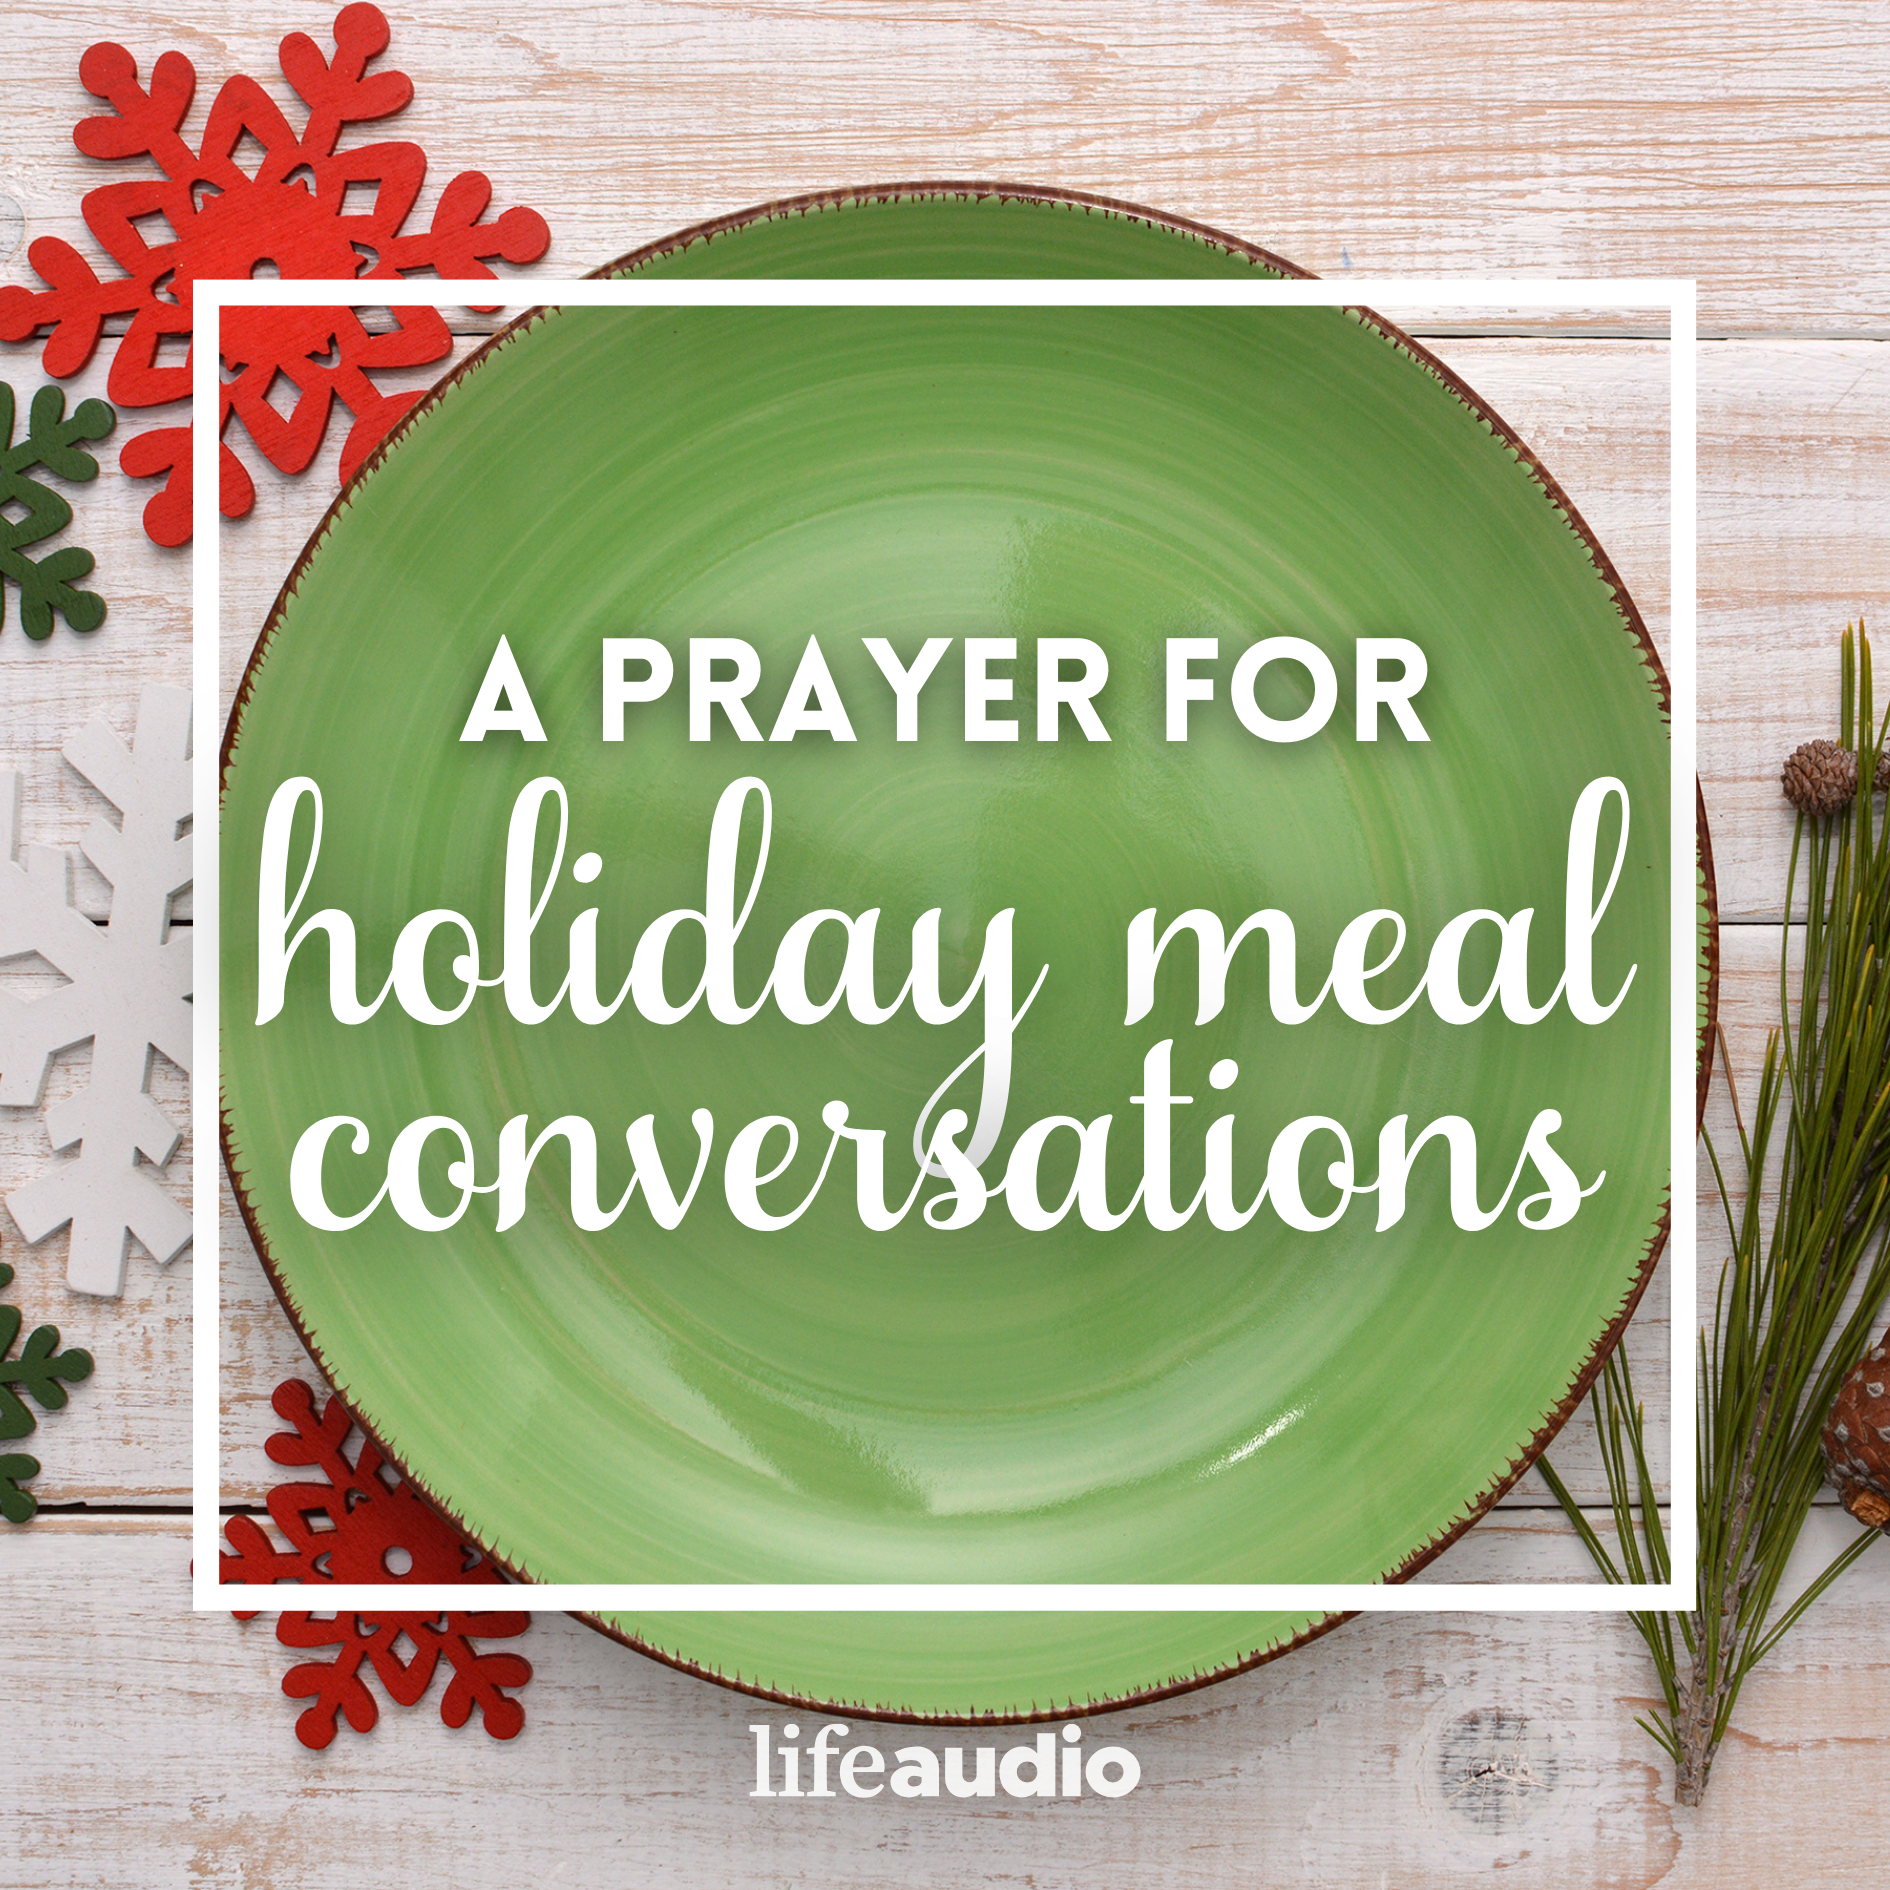 A Prayer for Holiday Meal Conversations